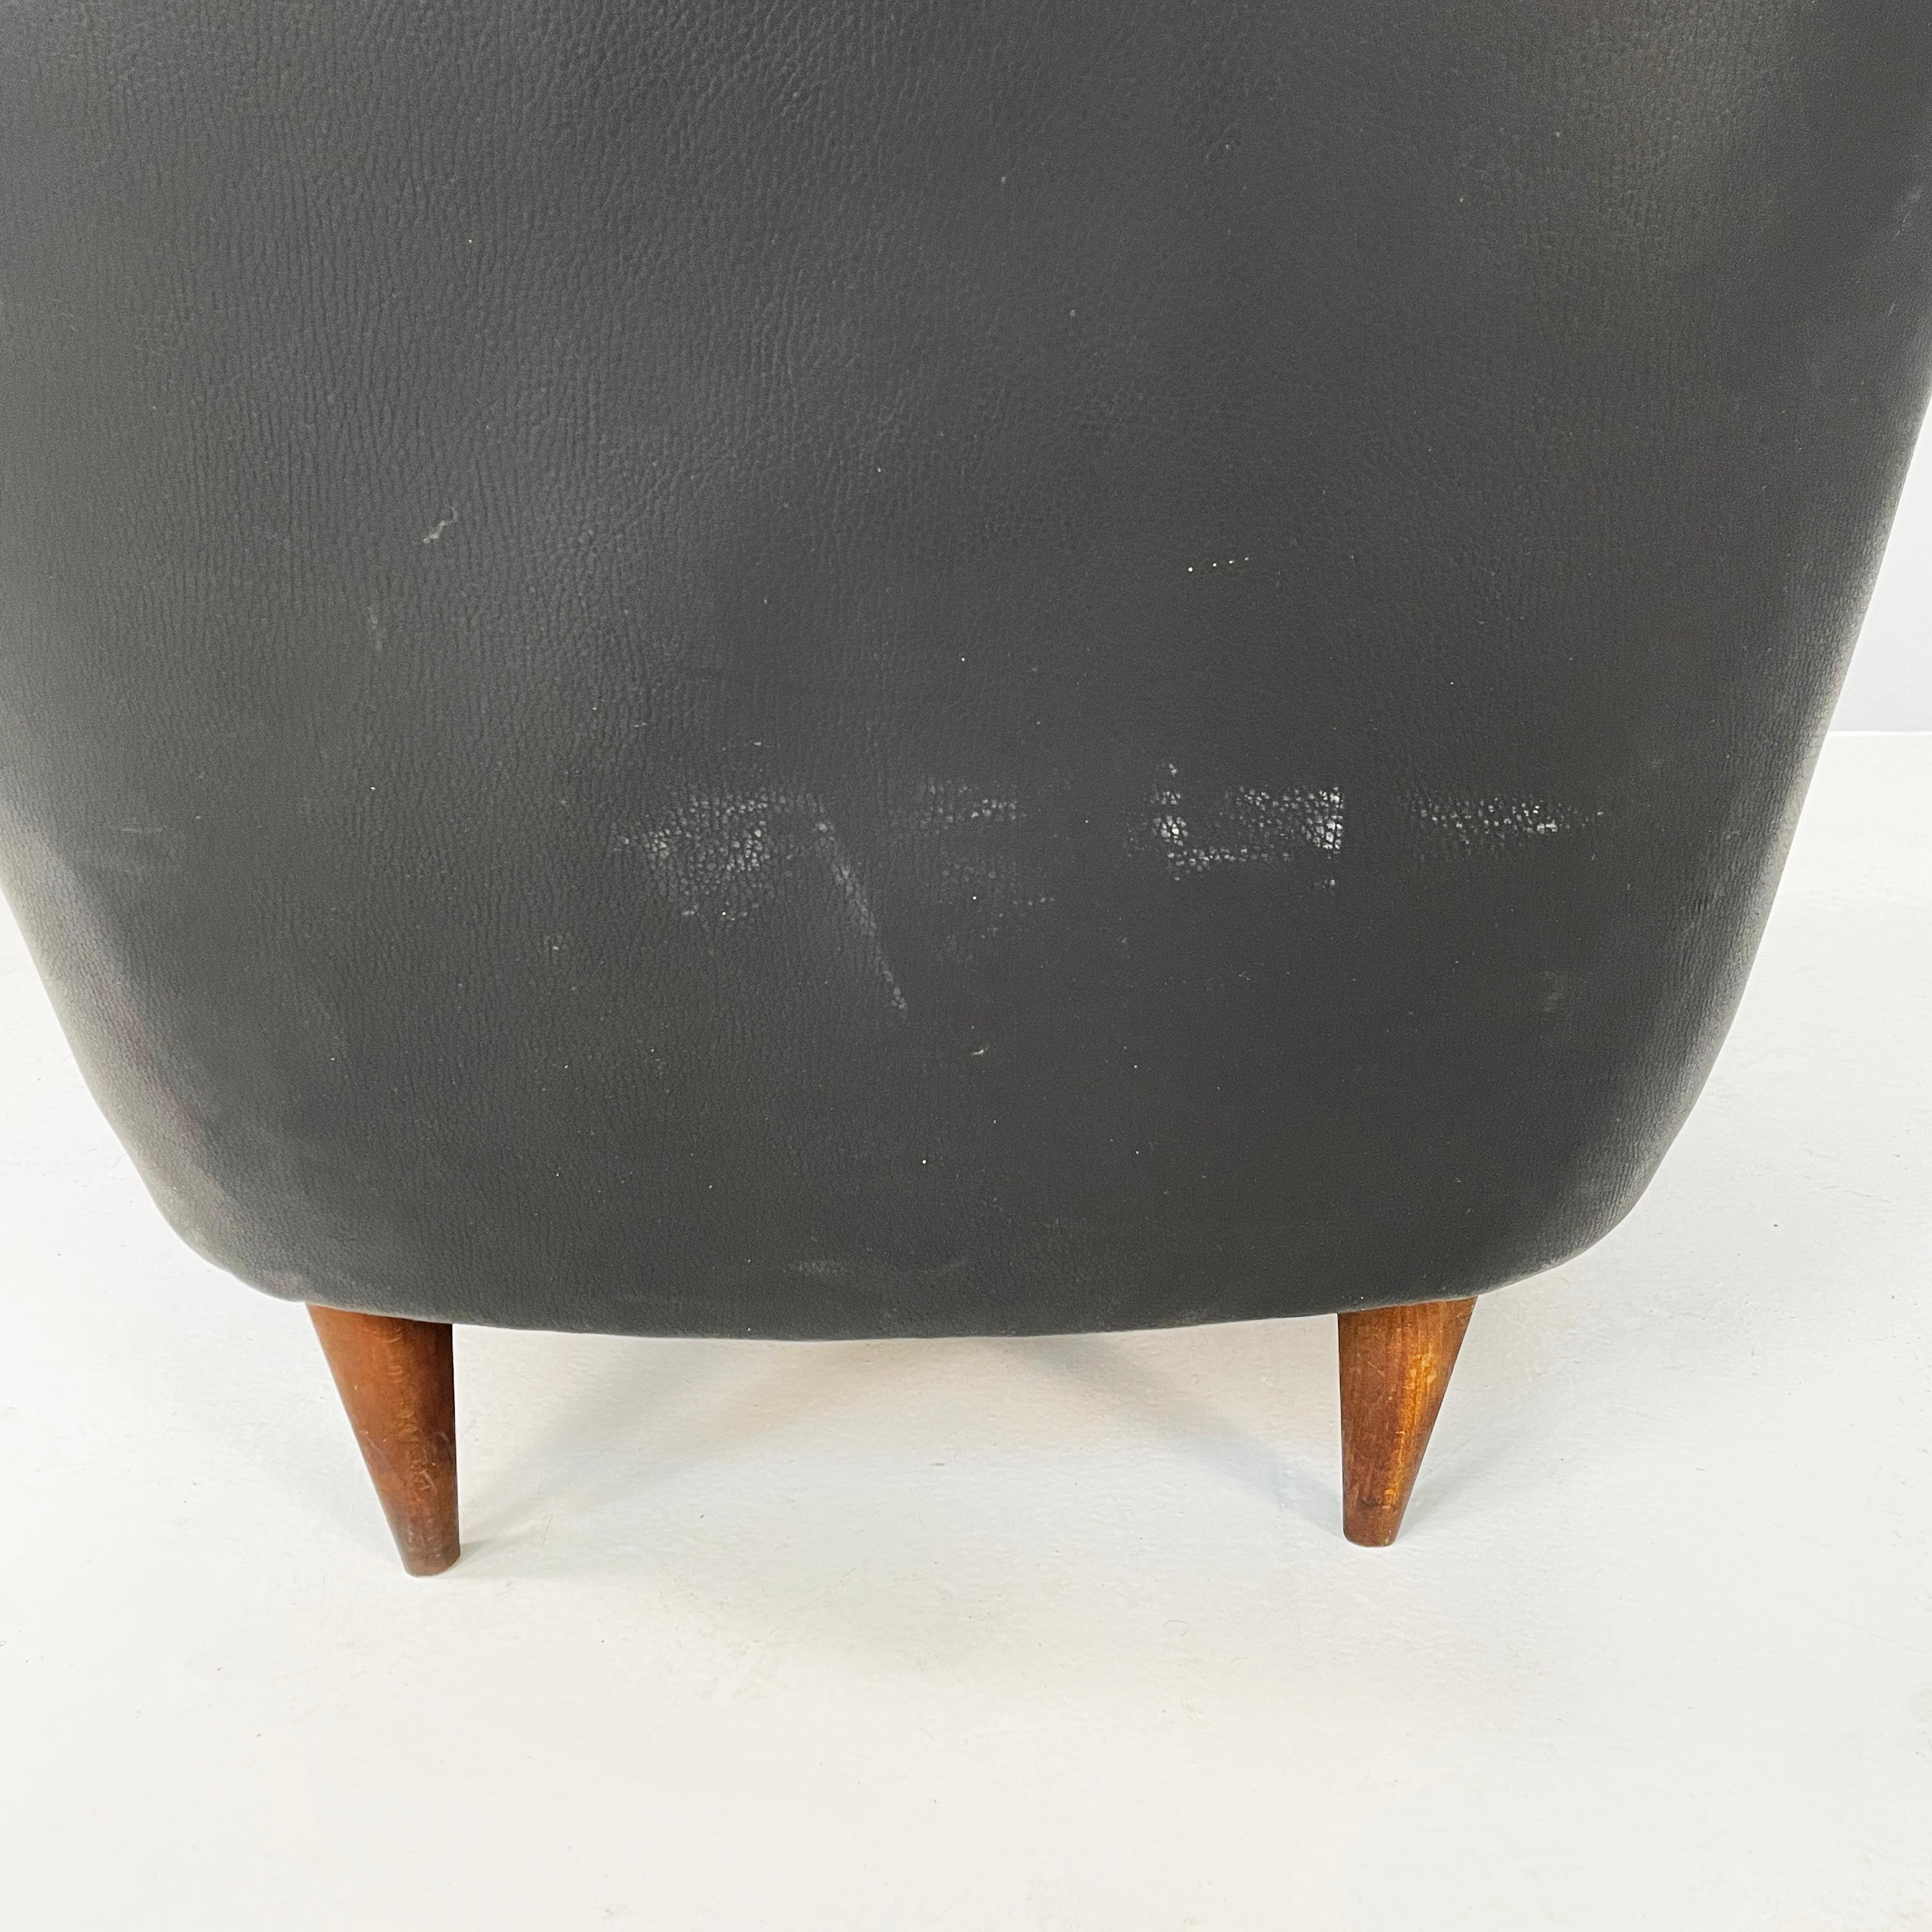 Italian modern Bergere Armchair in black leather and wood, 1970s For Sale 10